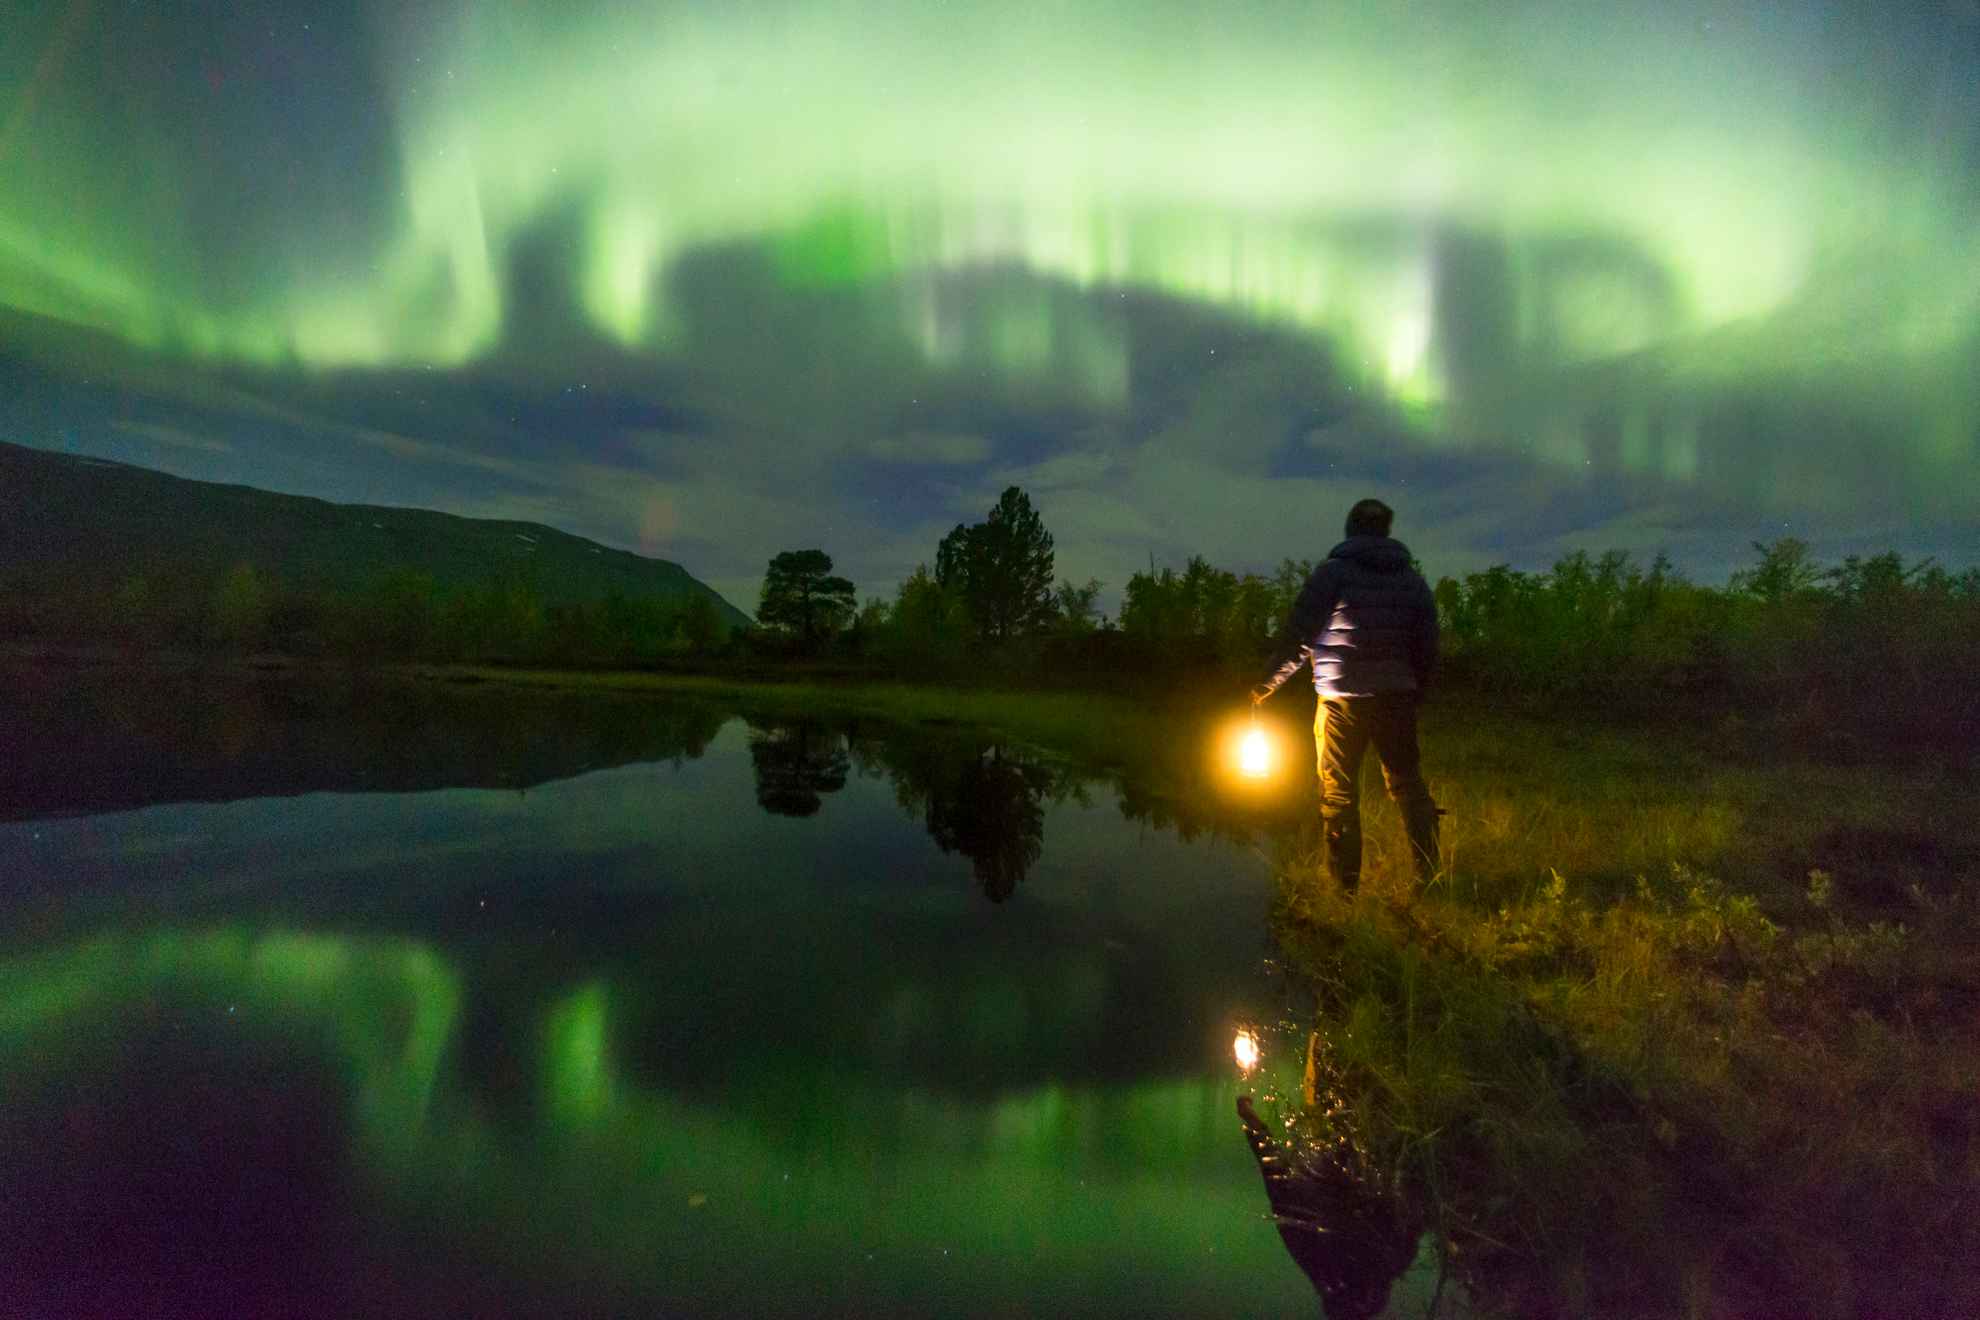 A person holding a light looks at the green northern lights in the sky. The northern lights are reflecting in the lake next to the person.